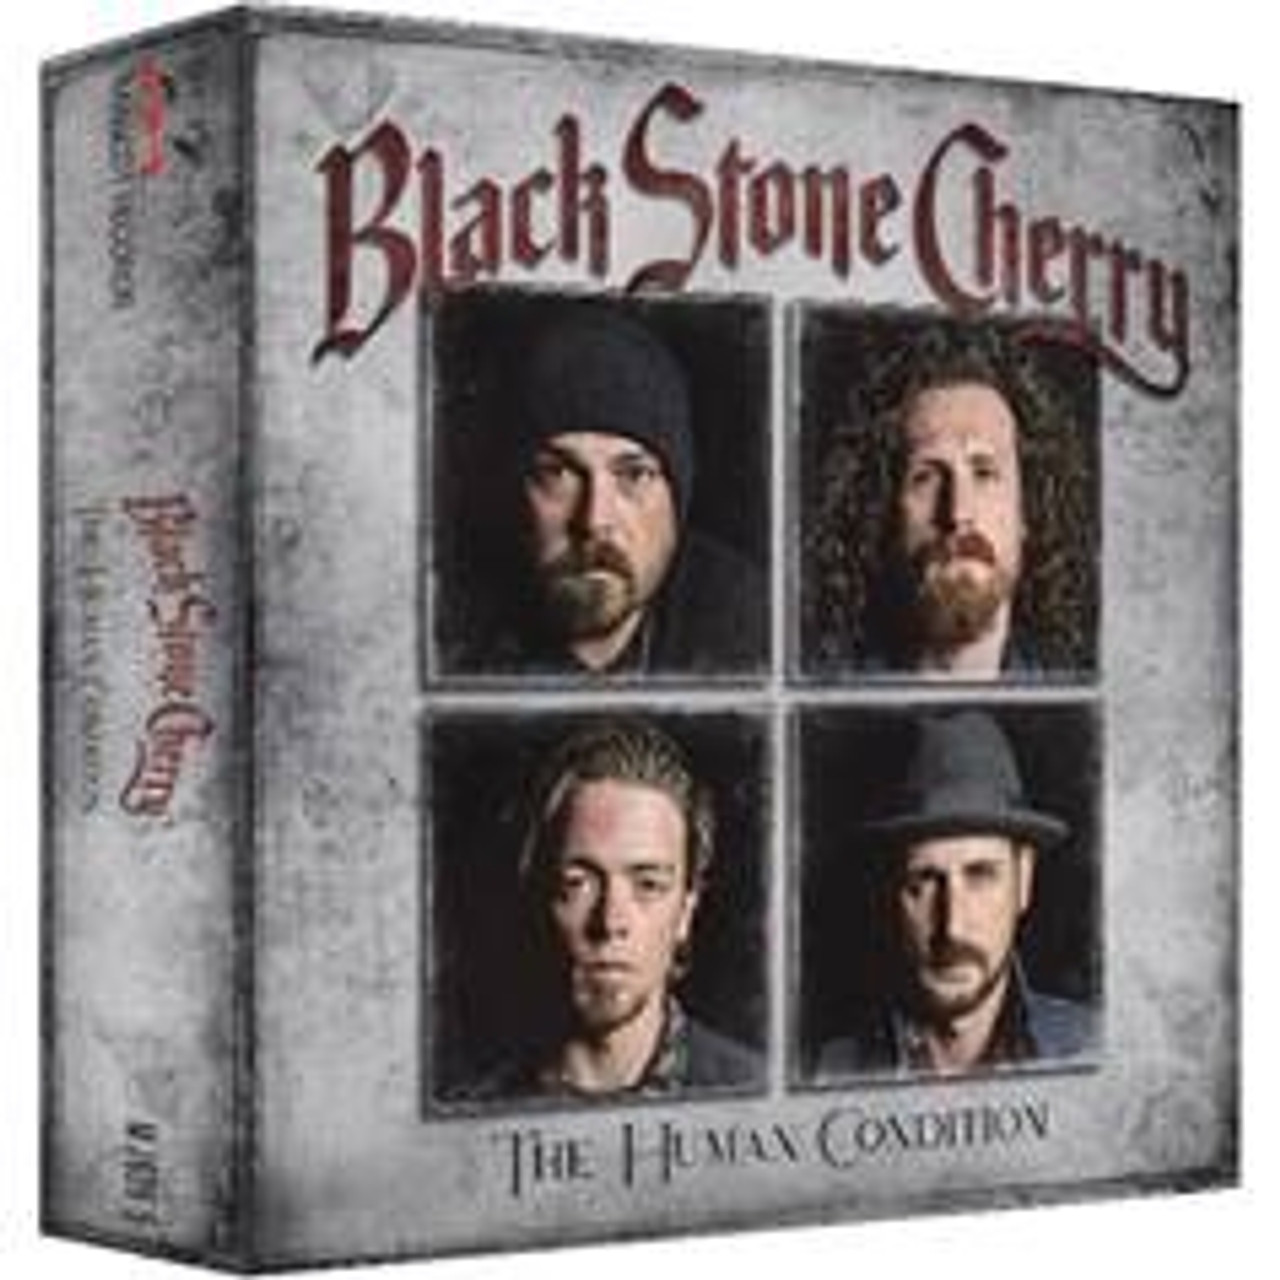 Black Stone Cherry 'The Human Condition' Limited Edition CD Box Set